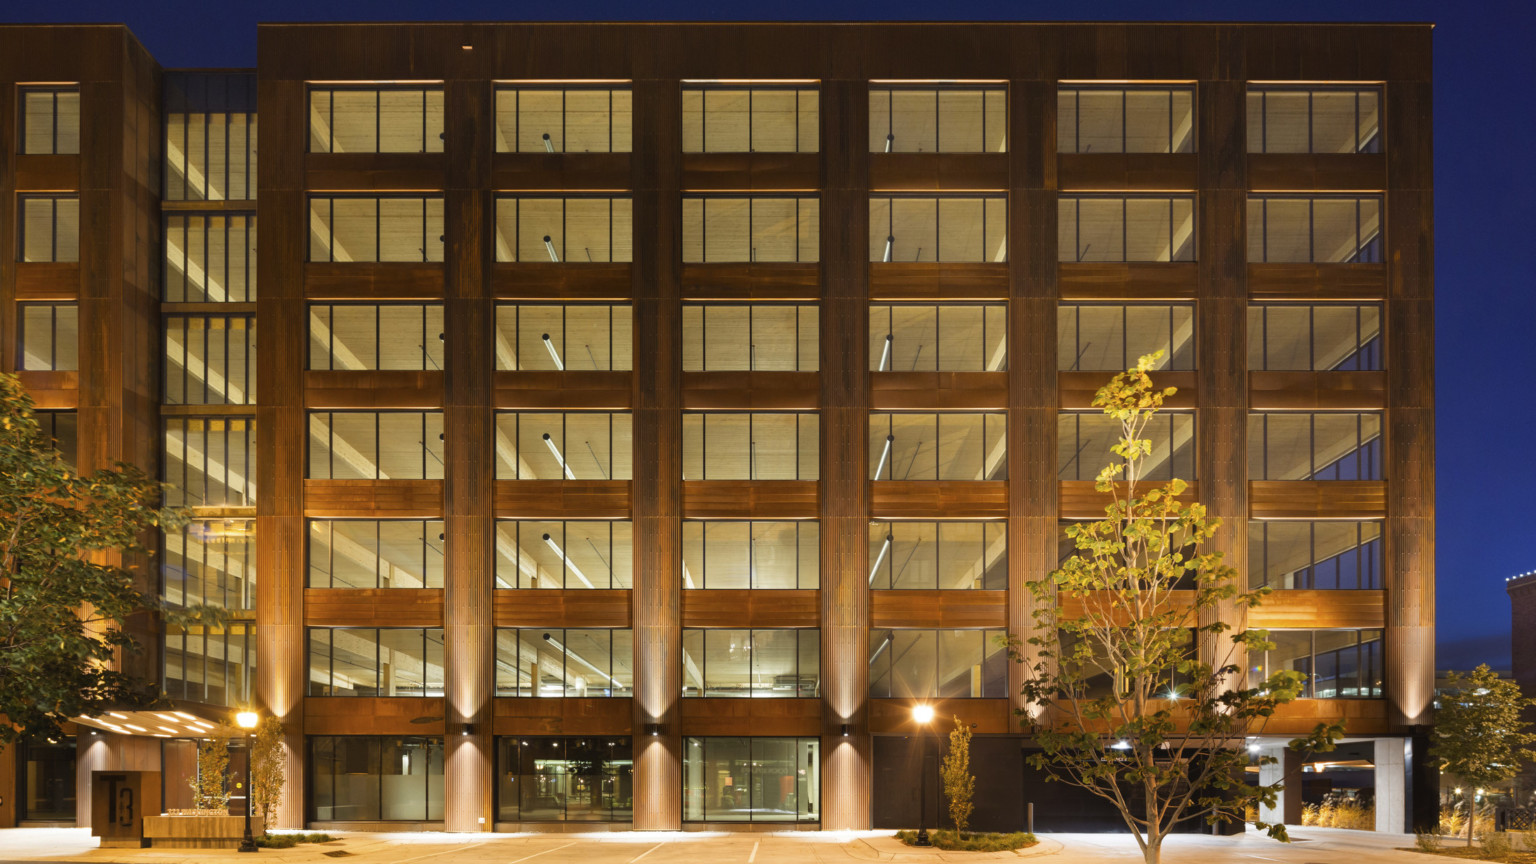 Hines T3 Partnership building in Minneapolis, a mass timber midrise building illuminated at night